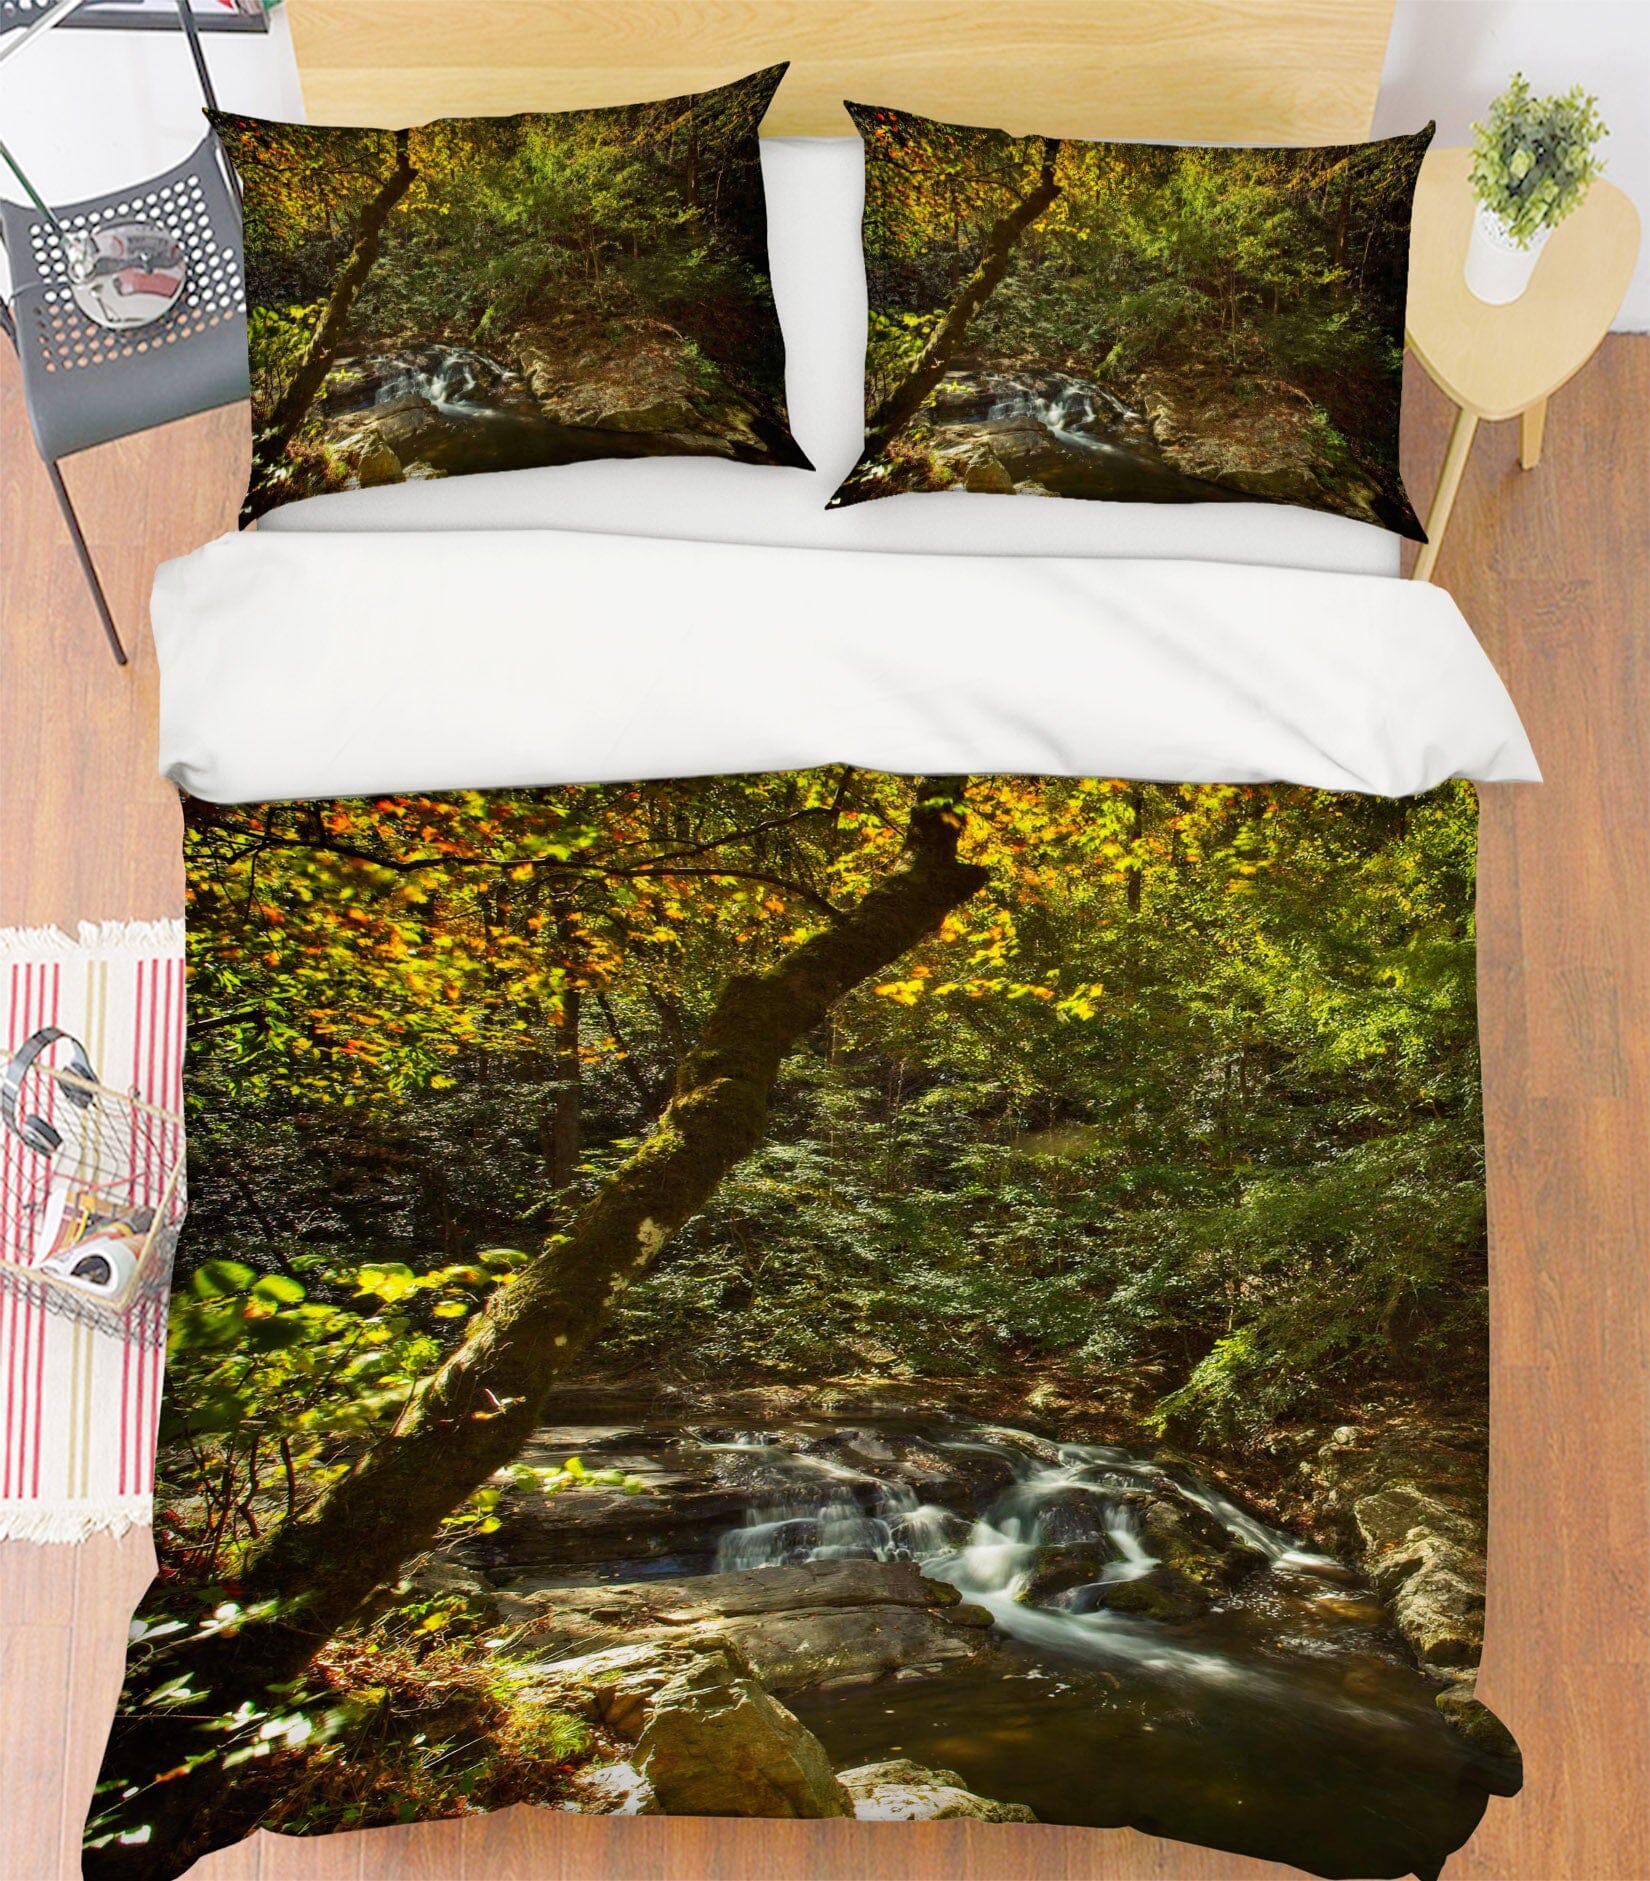 3D Tranquil Creek 2137 Kathy Barefield Bedding Bed Pillowcases Quilt Quiet Covers AJ Creativity Home 